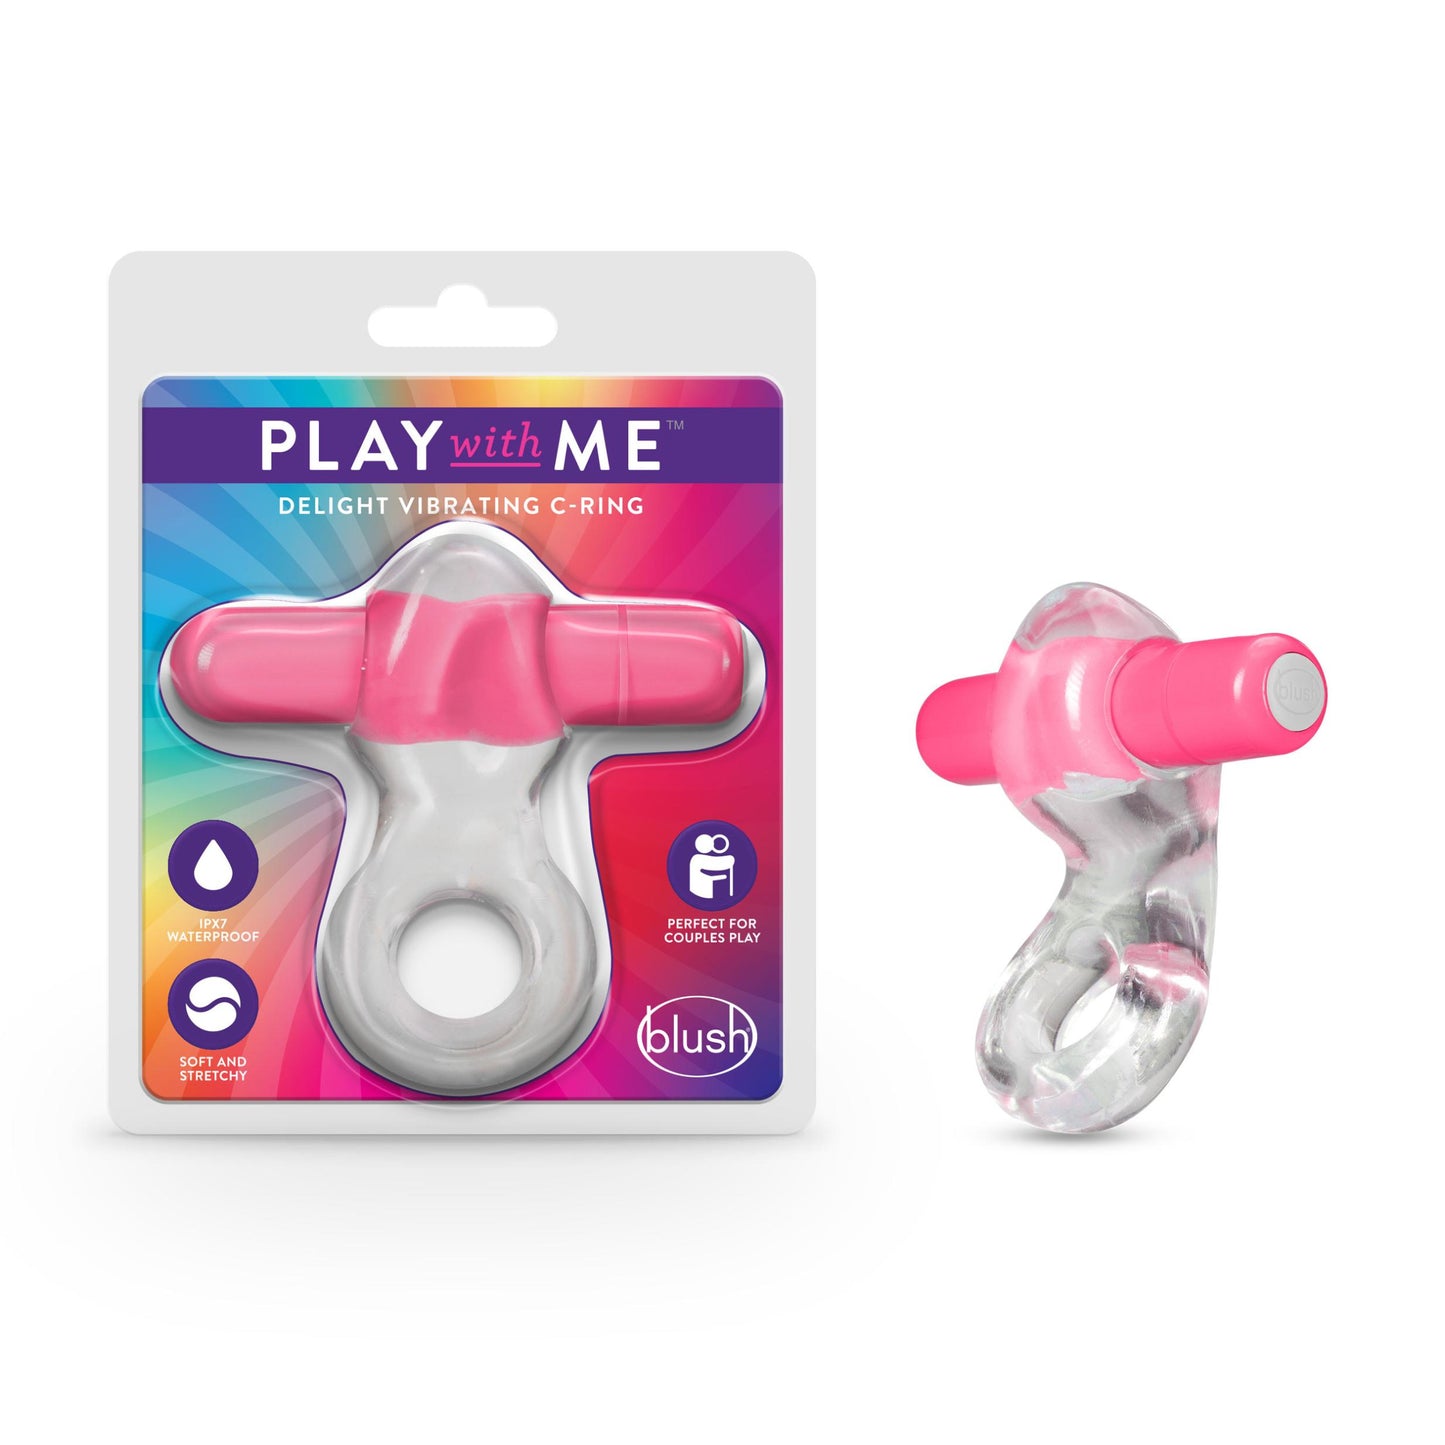 Play With Me – Delight Vibrating C-Ring